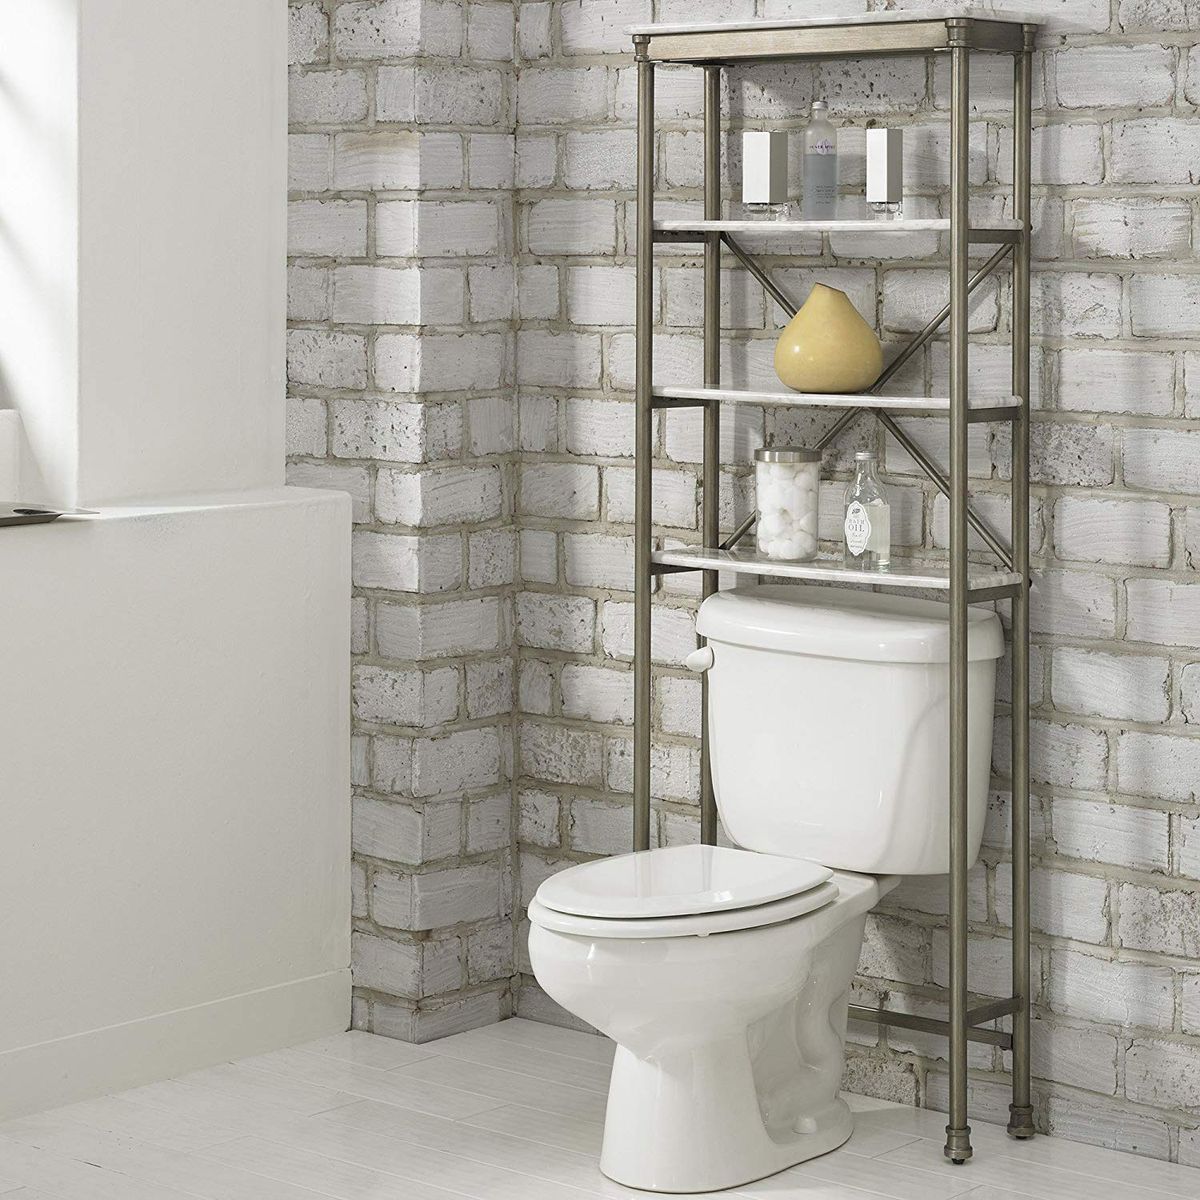 5 Best Over The Toilet Storage Ideas On, Shelving Unit Above Toilet